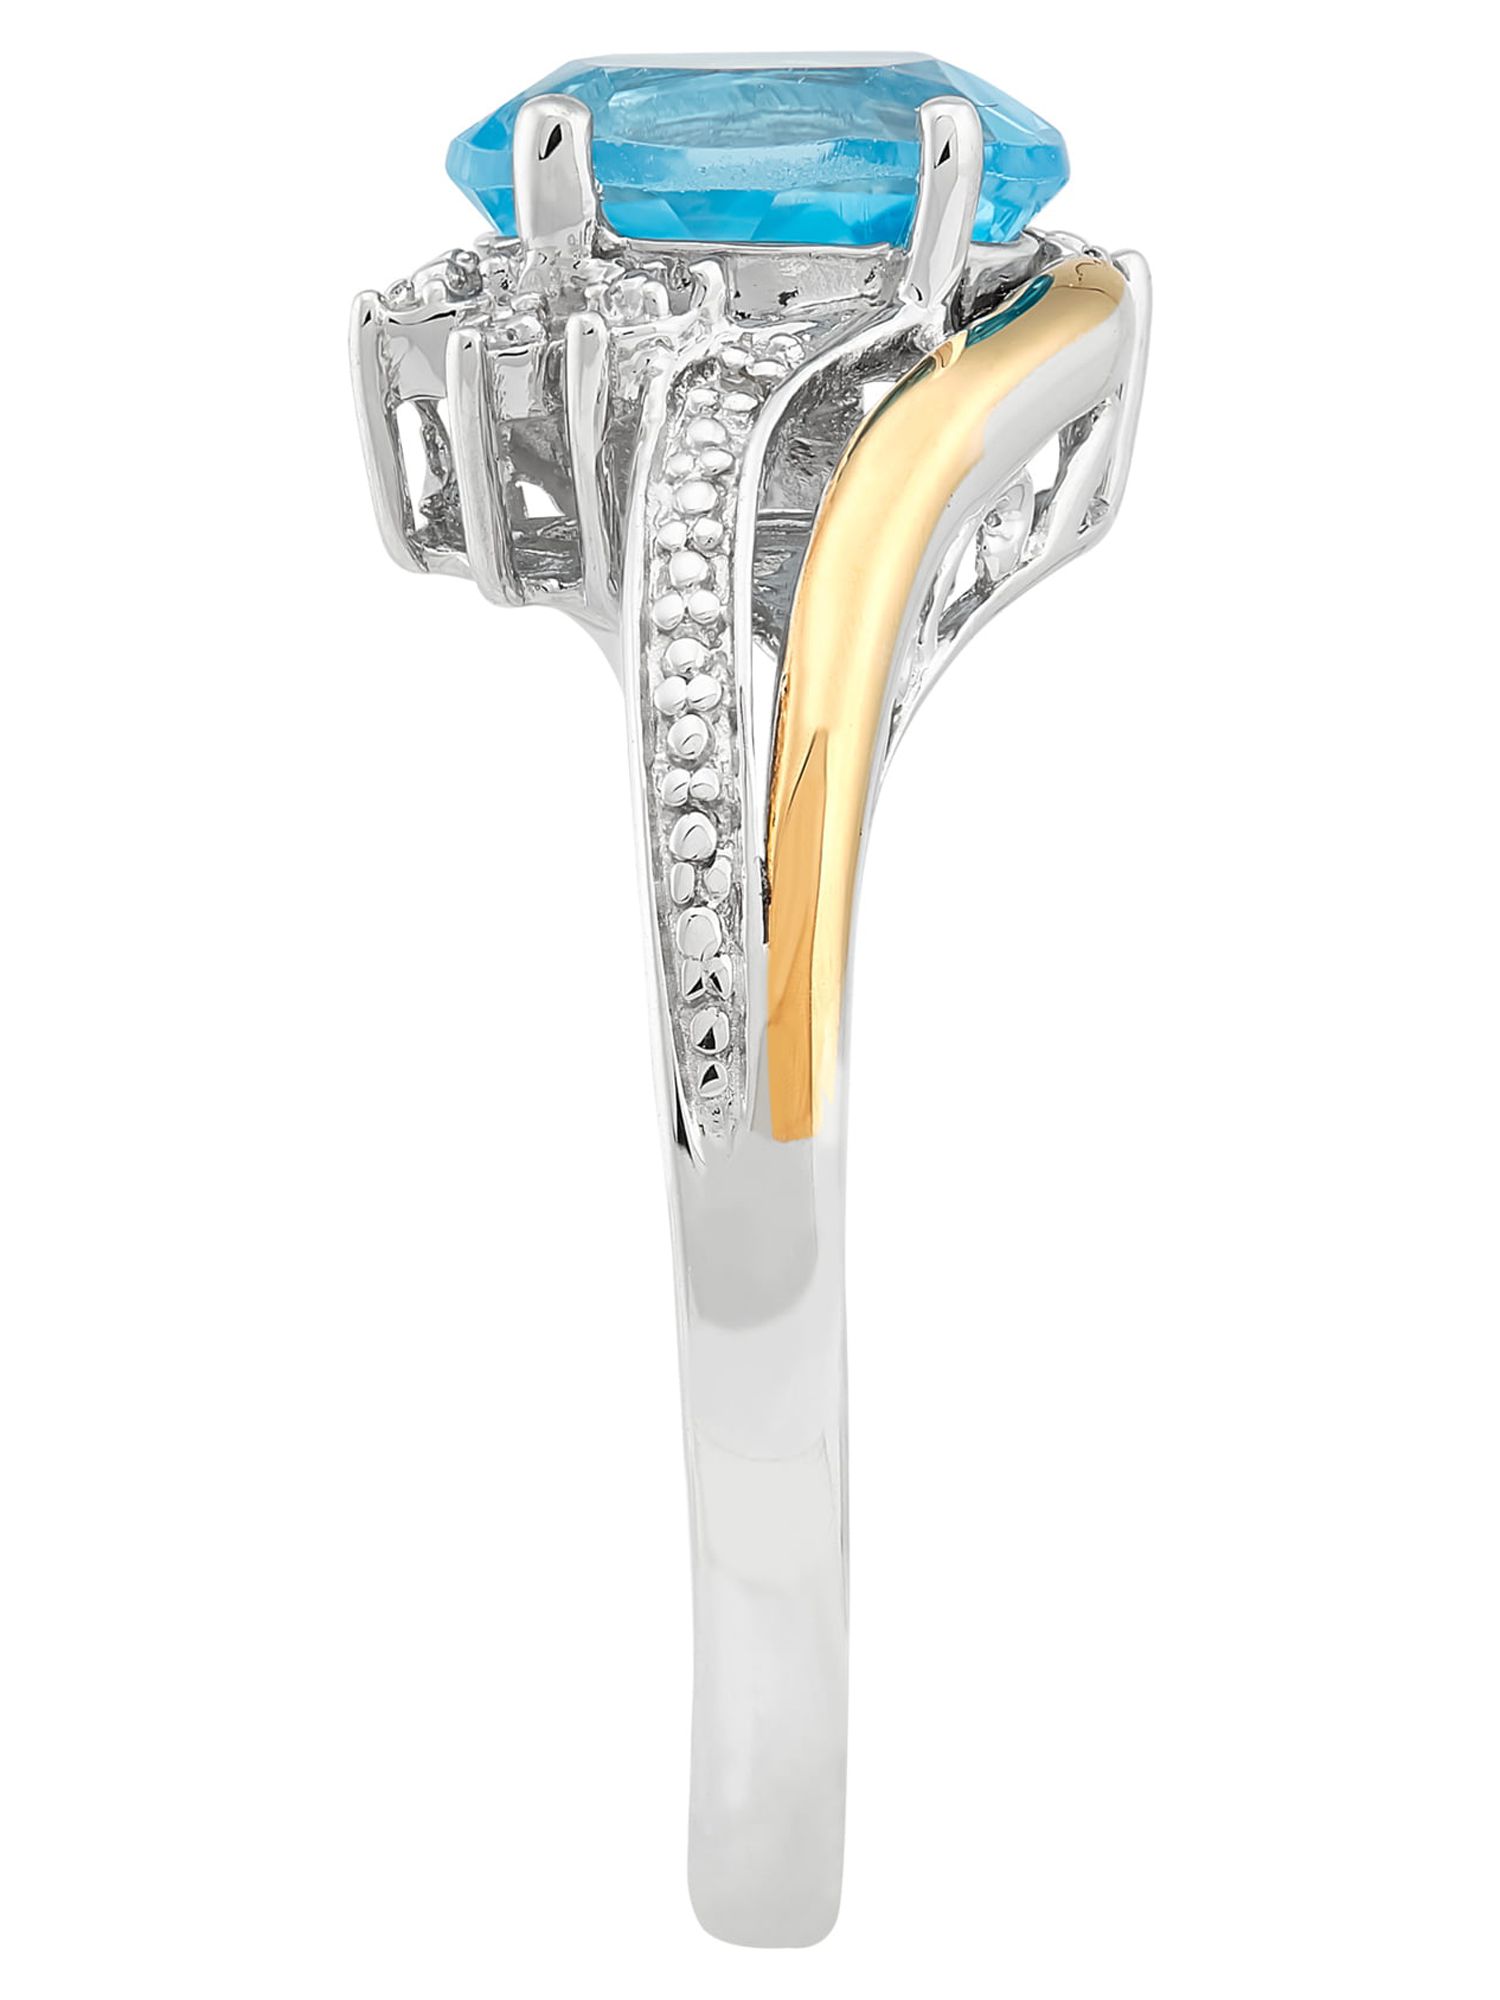 Brilliance Fine Jewelry Genuine Blue Topaz Diamond Accent Ring in Sterling Silver and 10K Yellow Gold - image 2 of 4